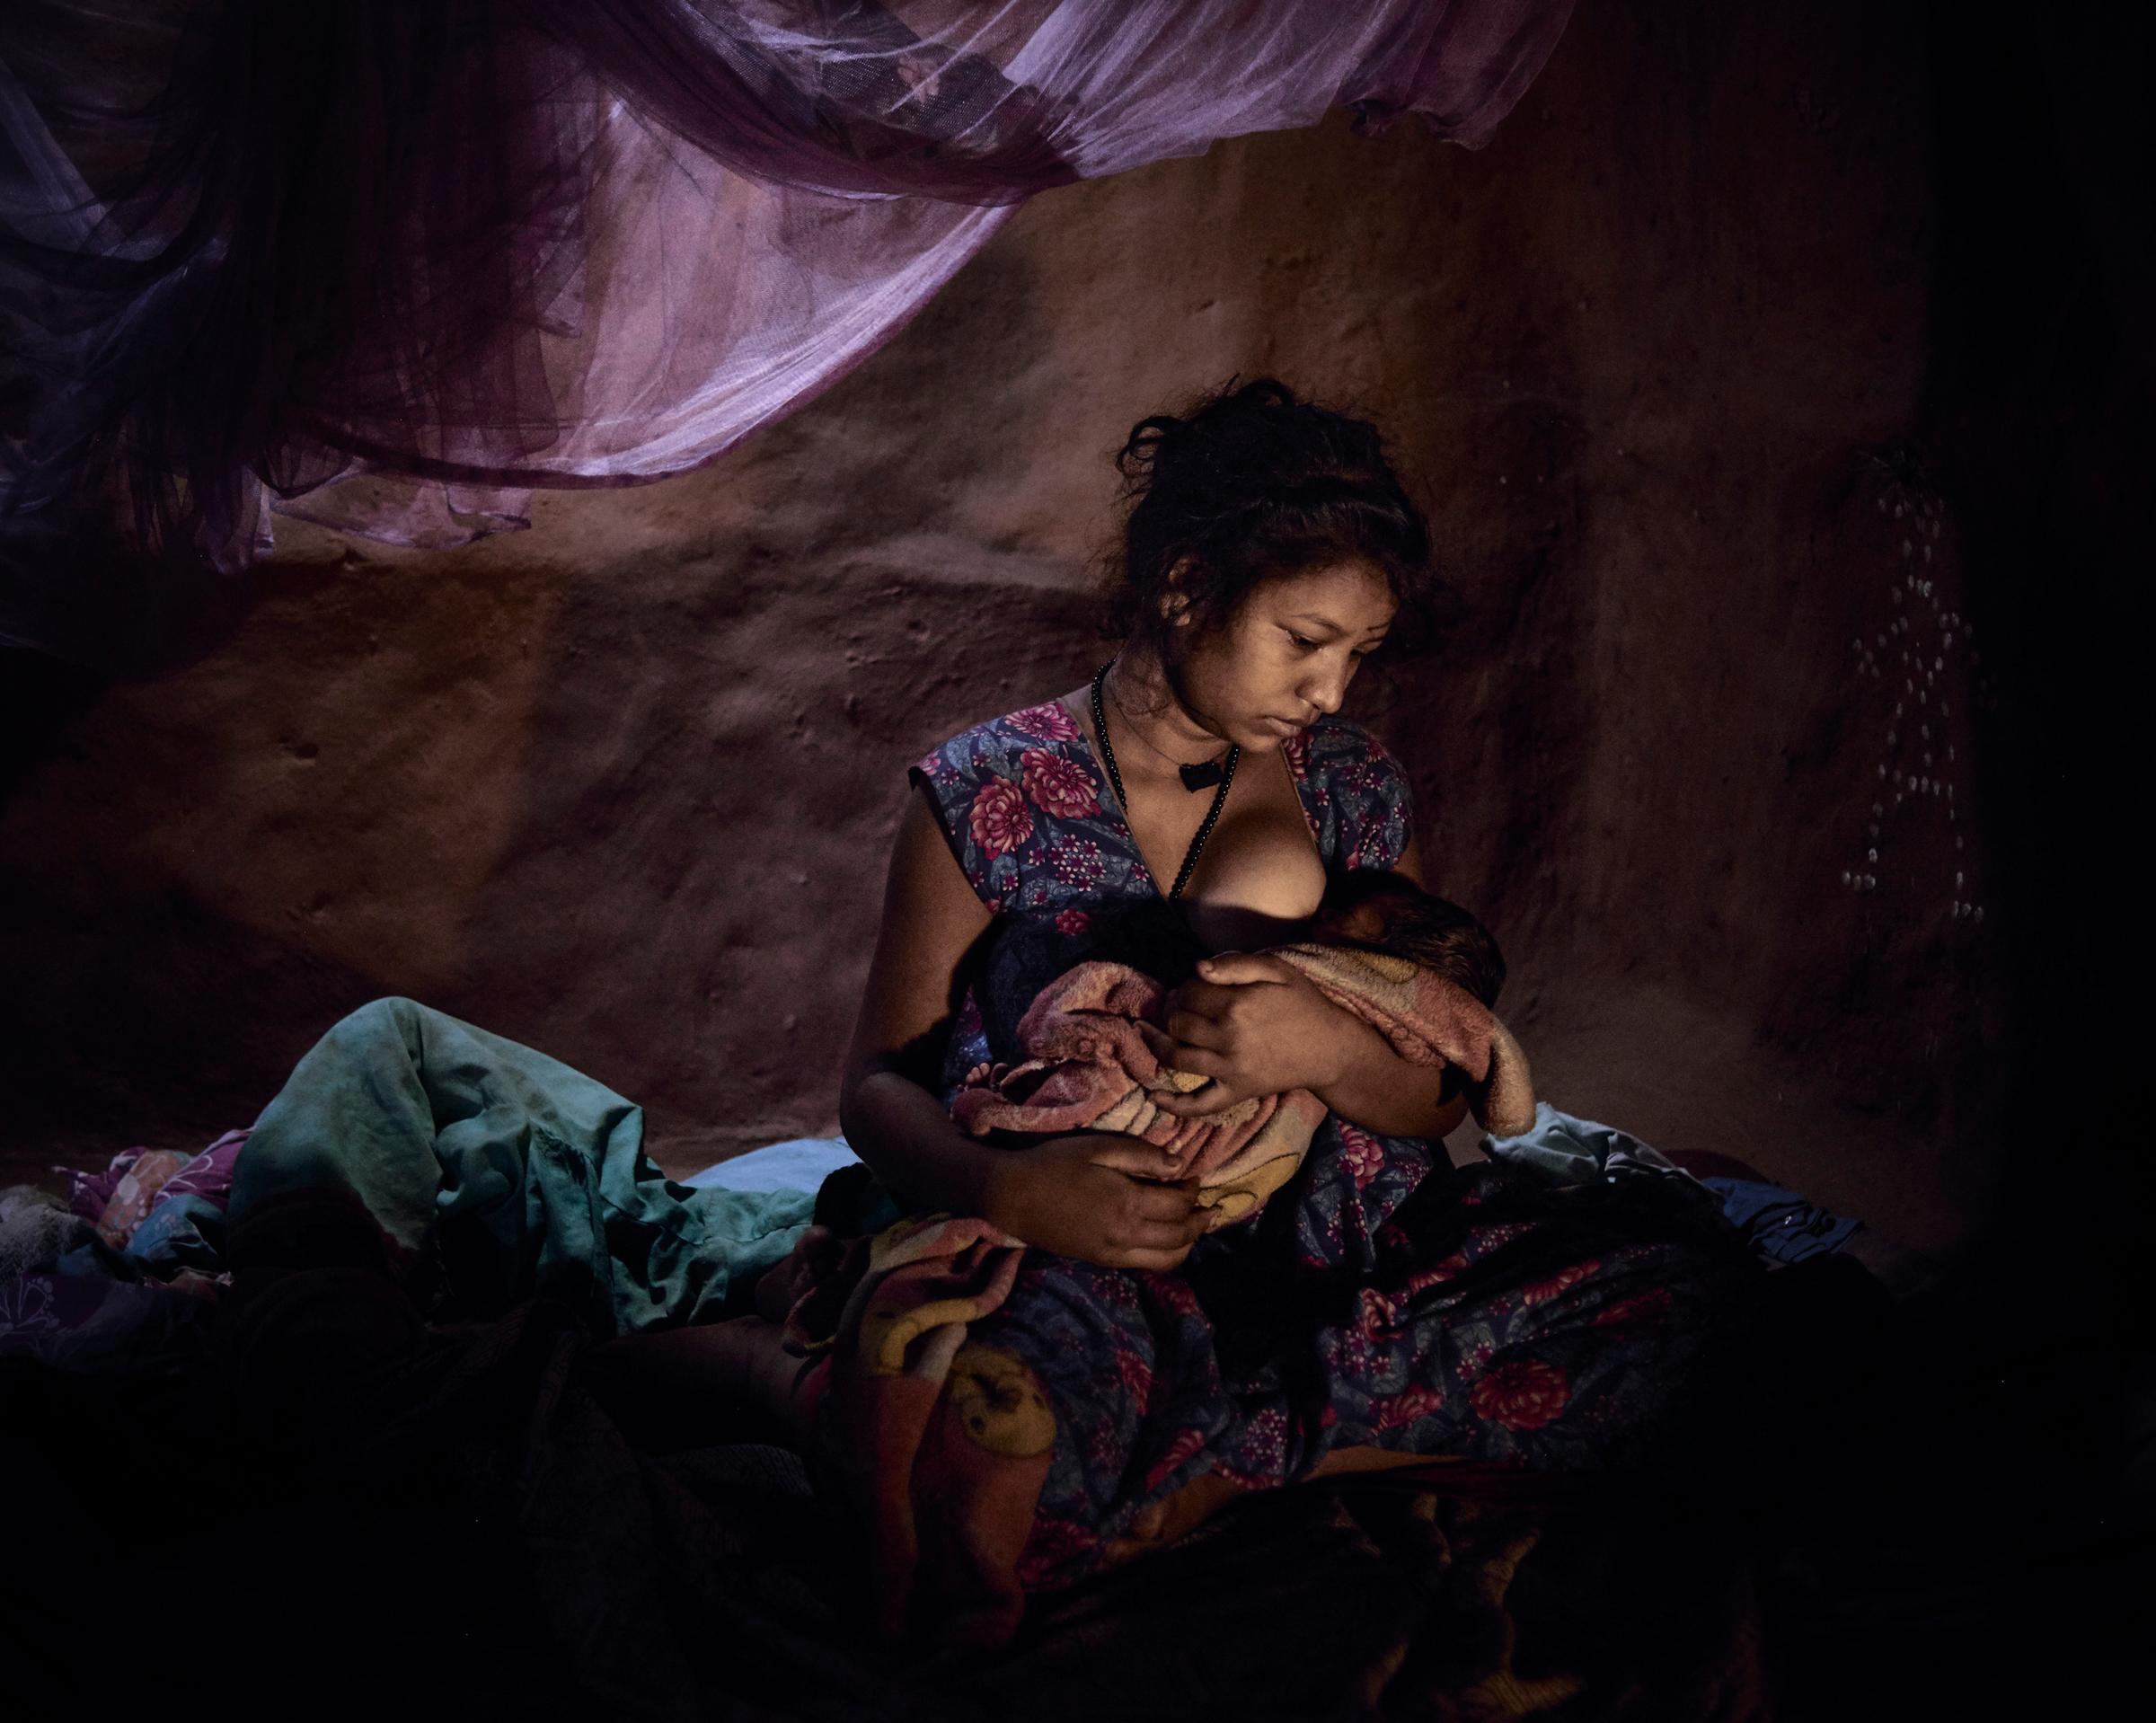 Saraswati, 16, must live in a closed dark room with her three day old baby because she bled after childbirth.